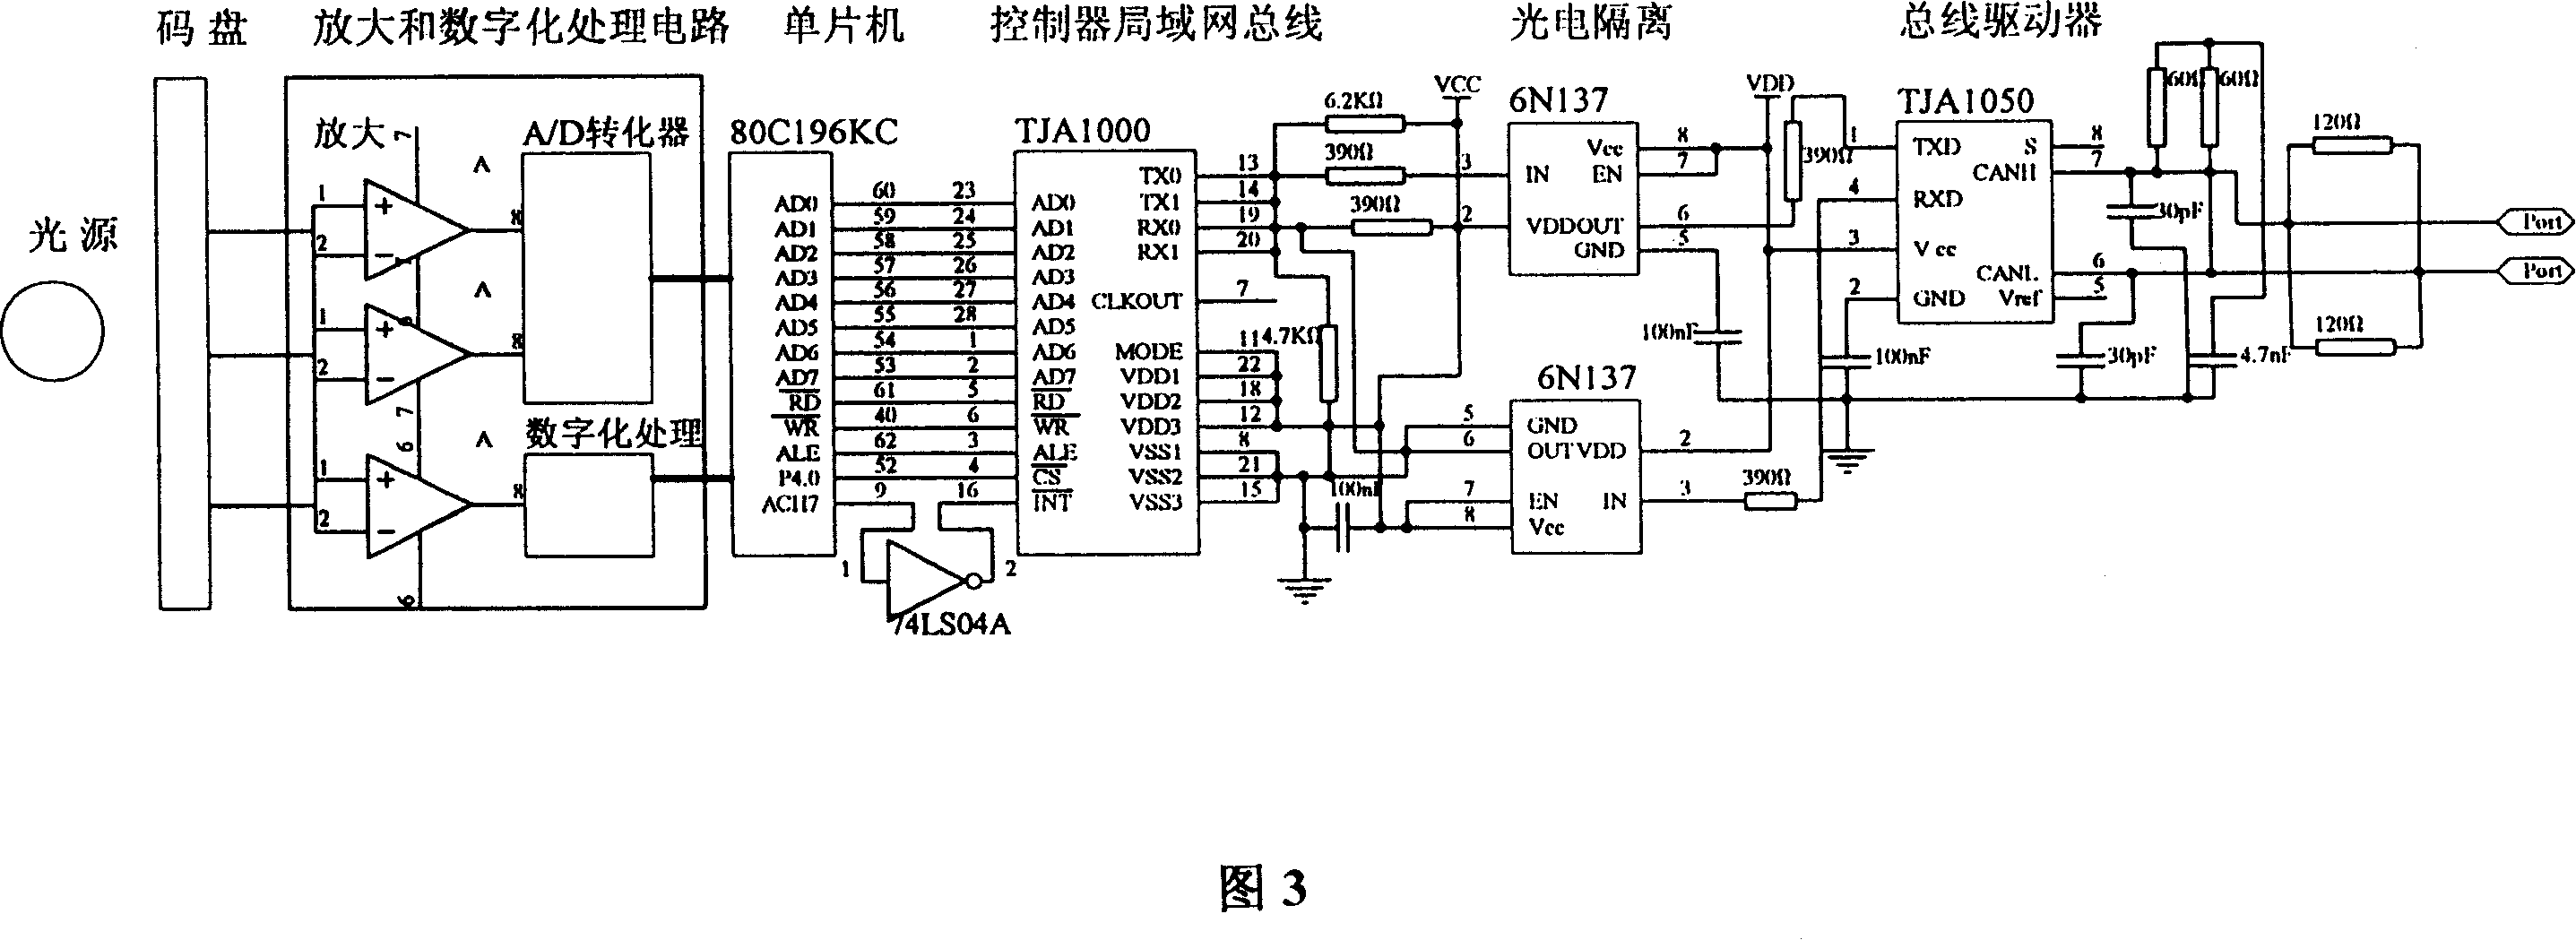 Absolute encoder circuit with controller local area network bus